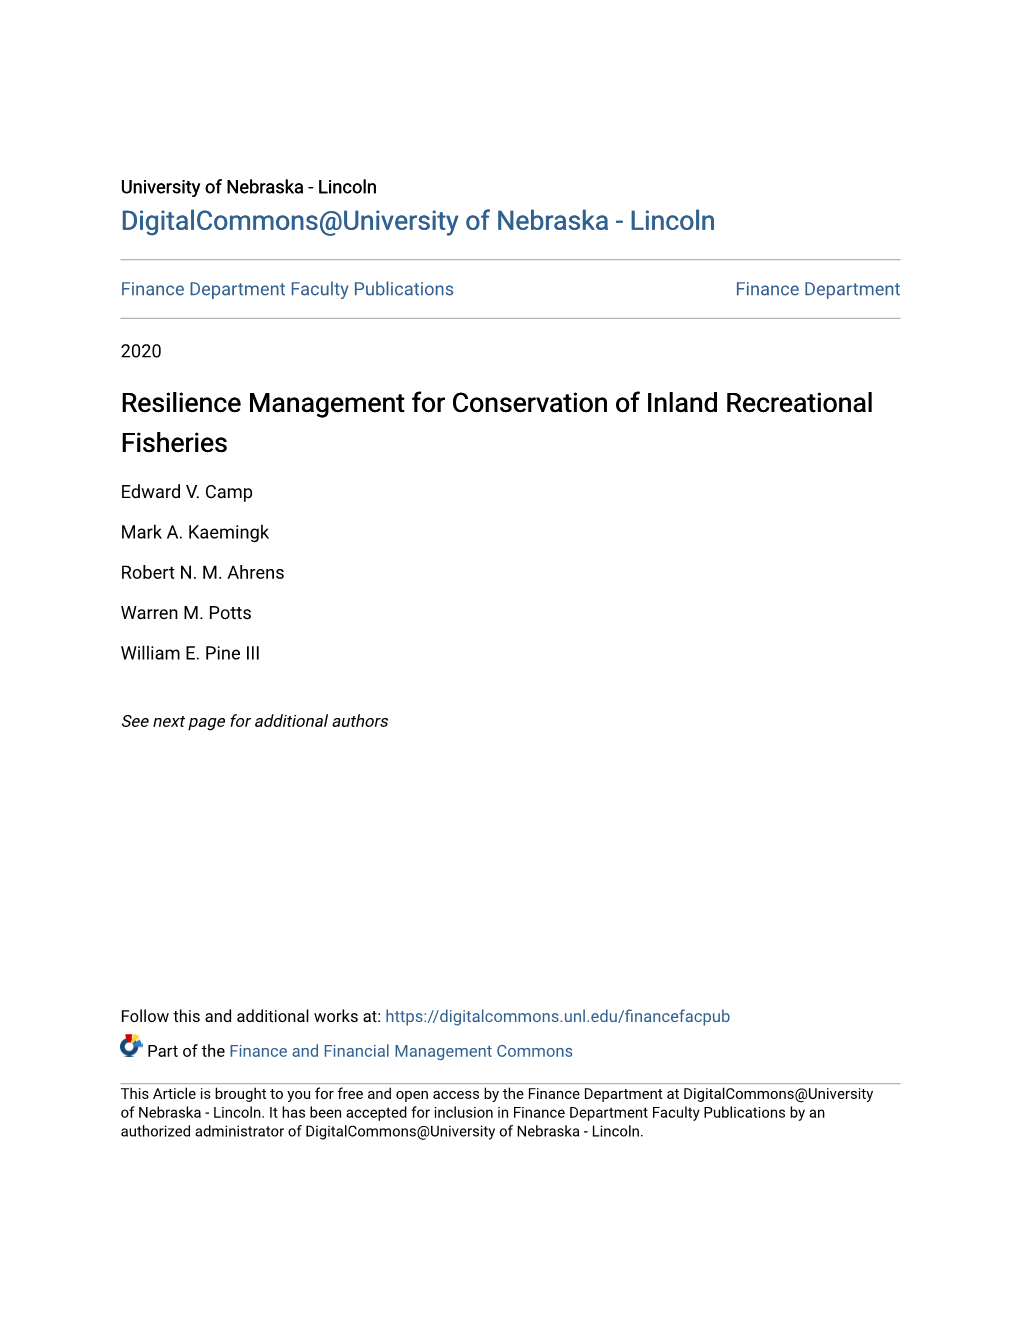 Resilience Management for Conservation of Inland Recreational Fisheries